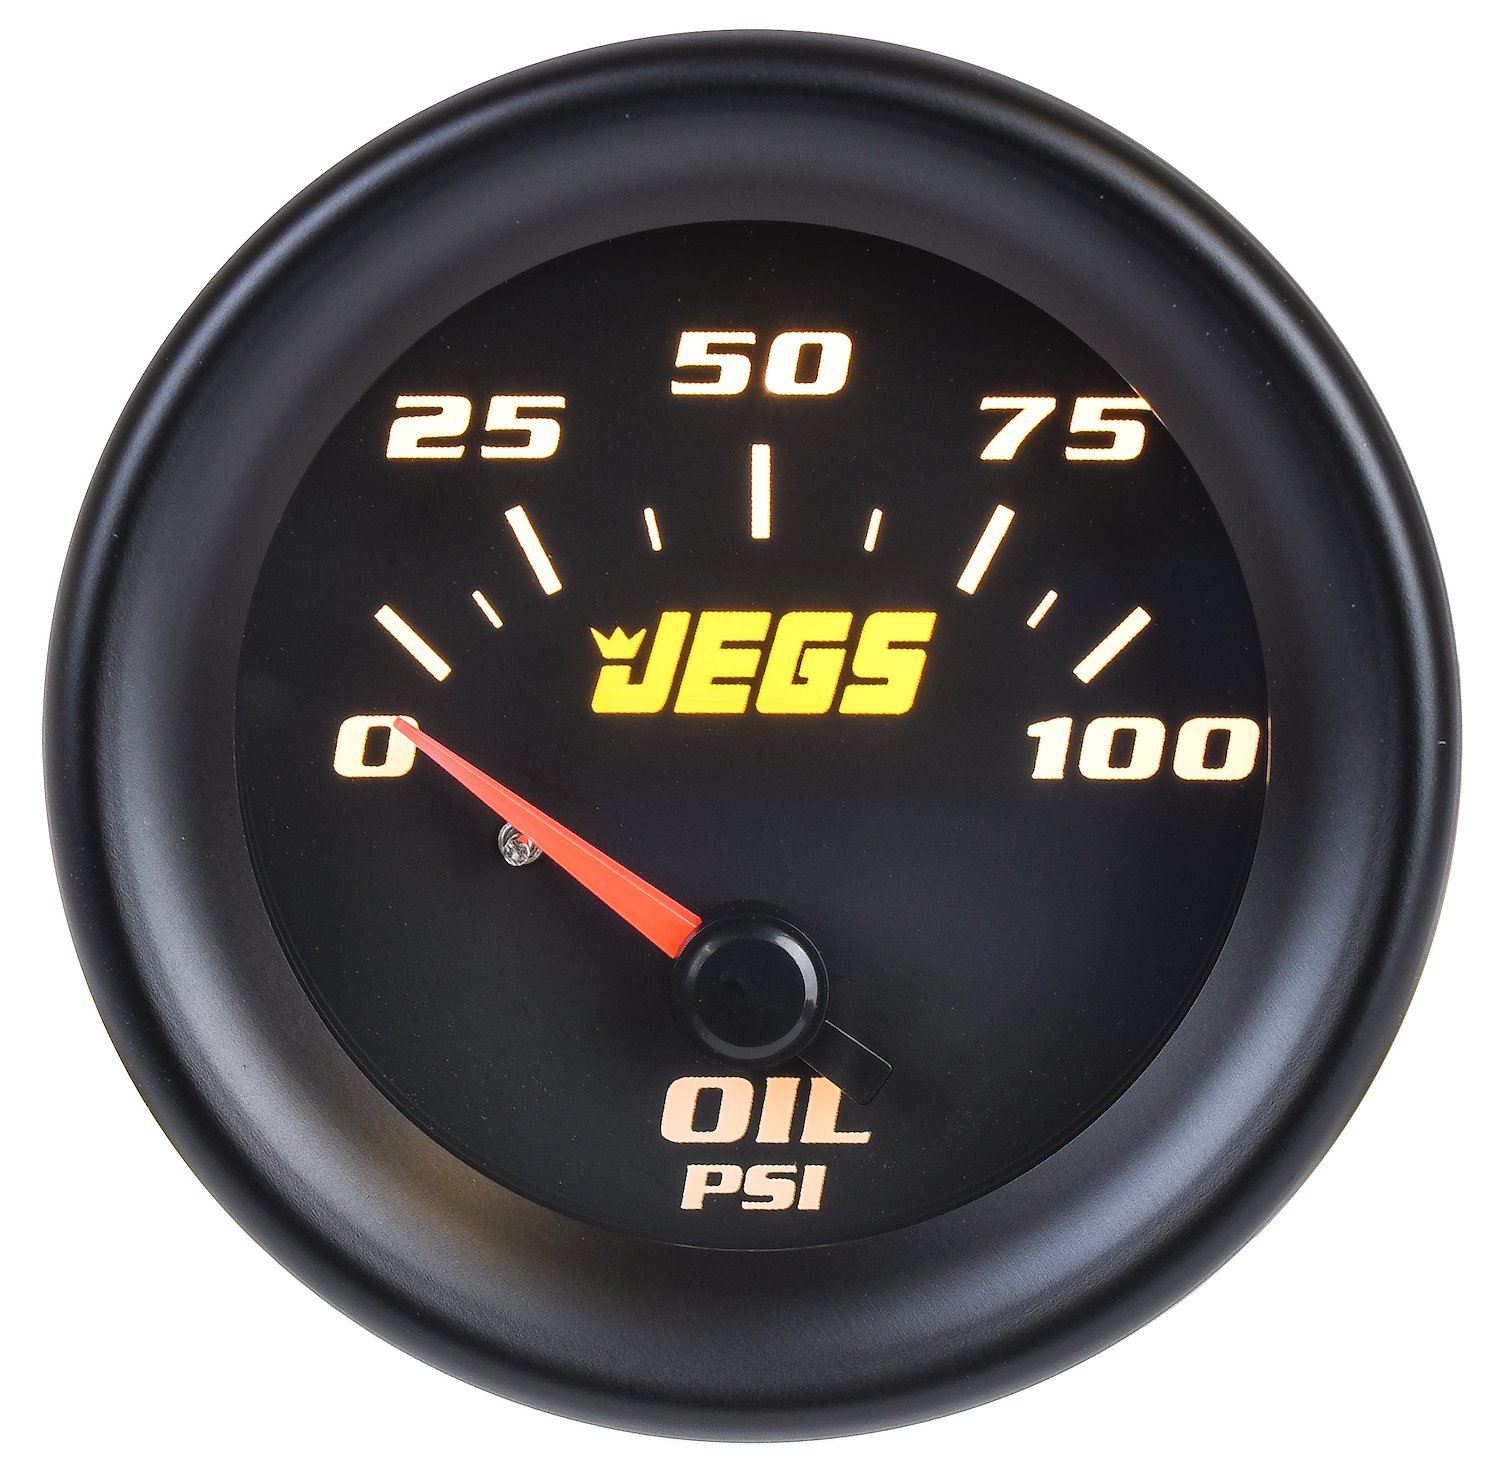 Oil Pressure Gauge [2 1/16 in. Electrical, 0-100 psi with Black Face]